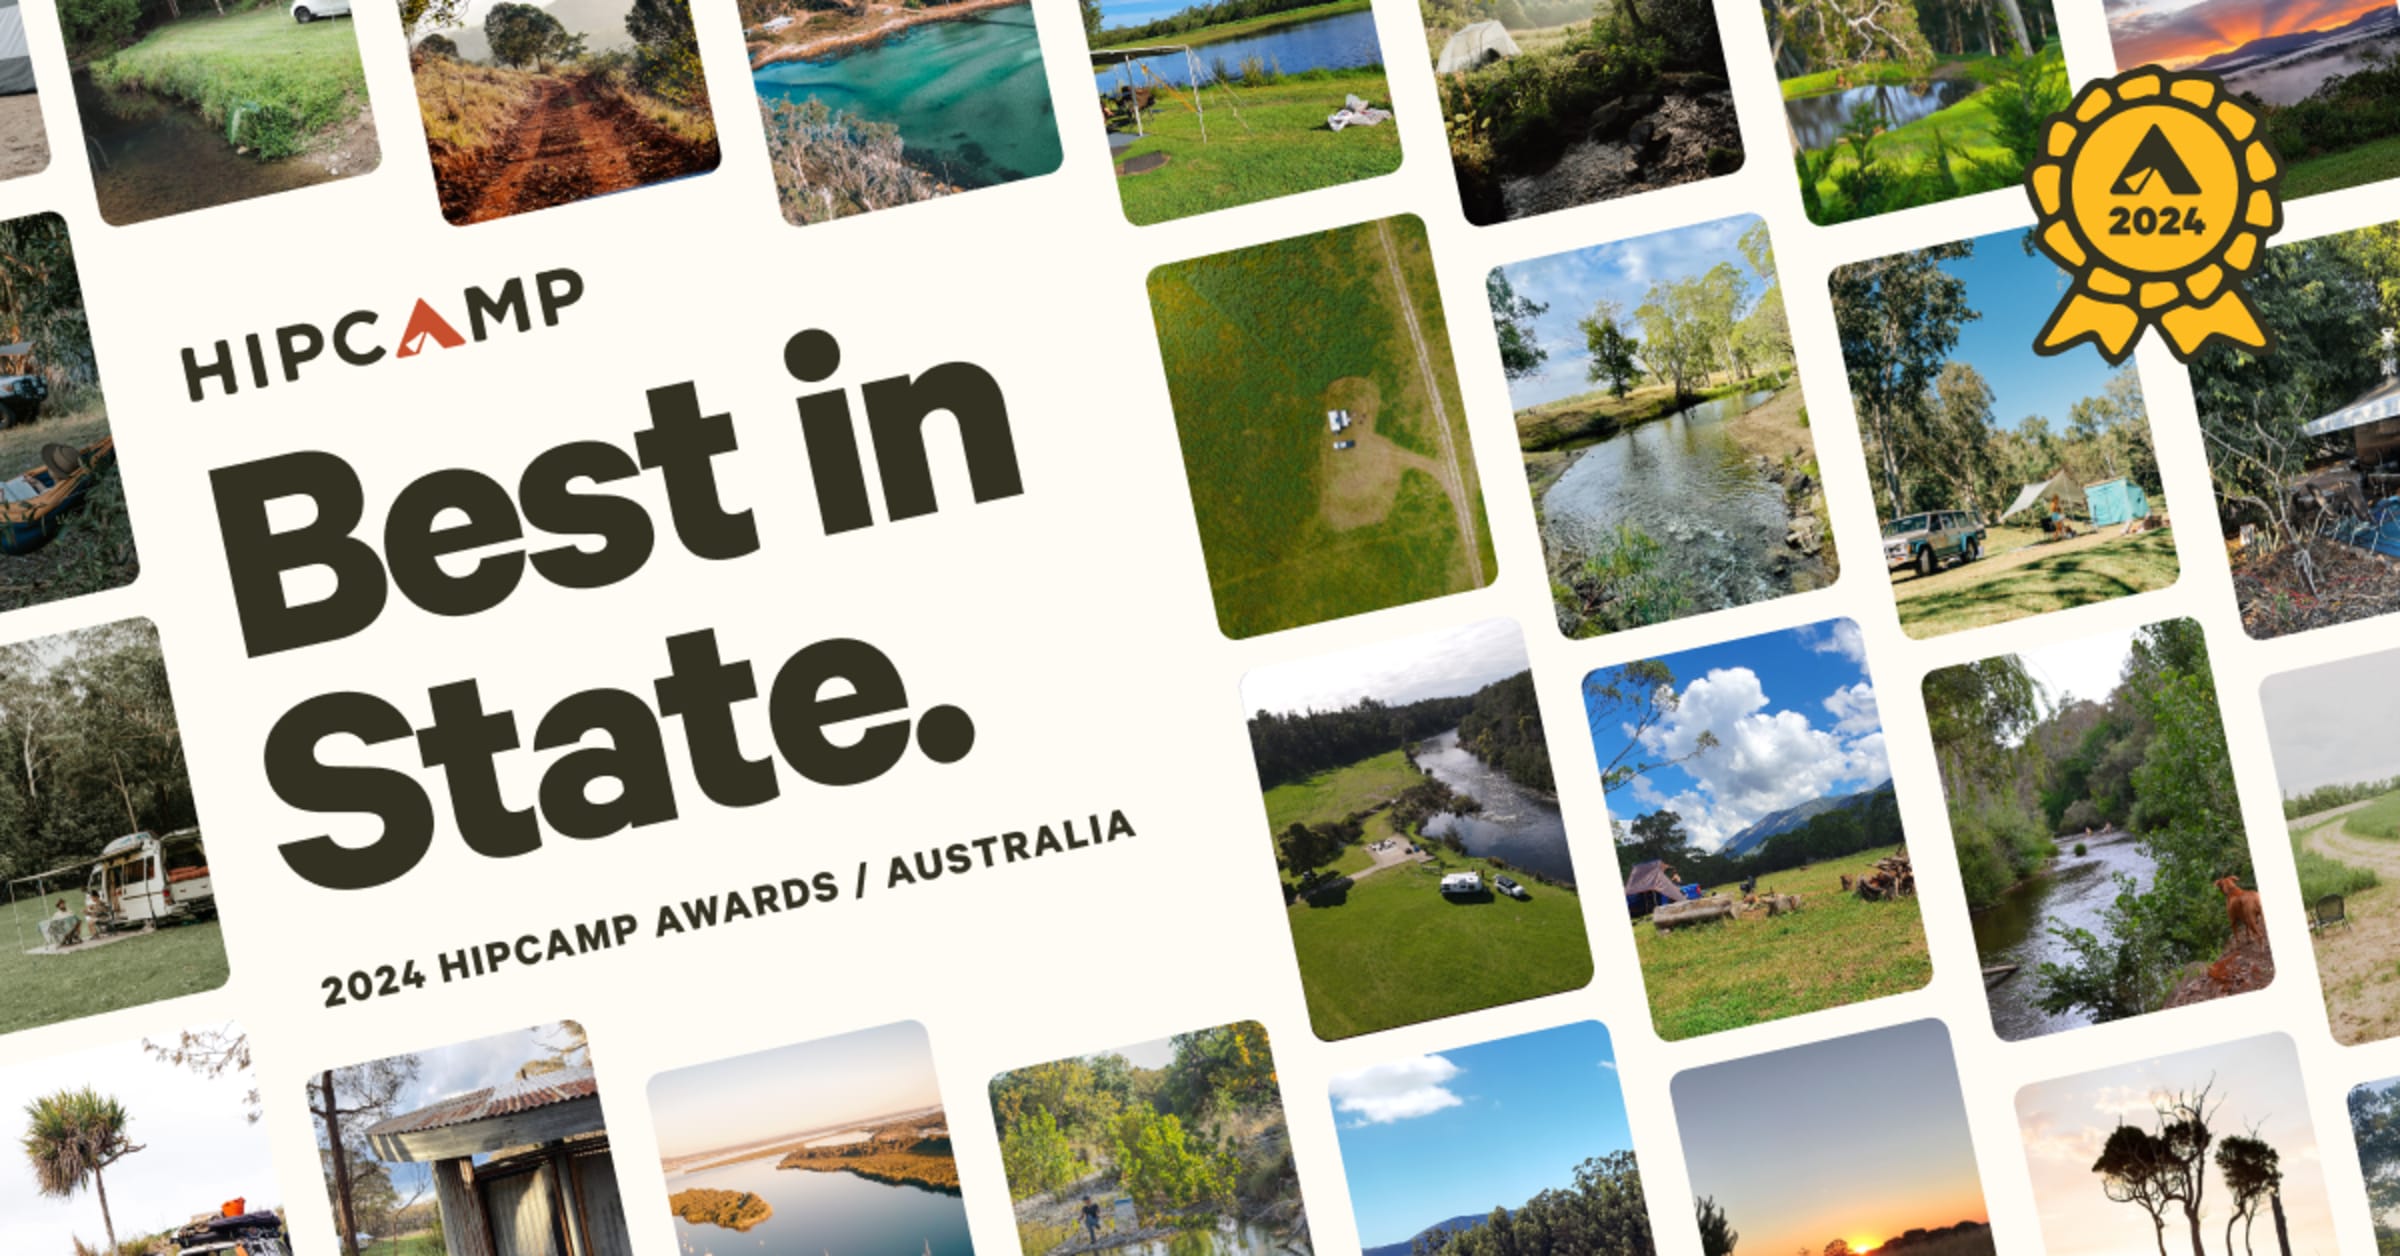 Hipcamp Awards 2024: Australia’s Best in State